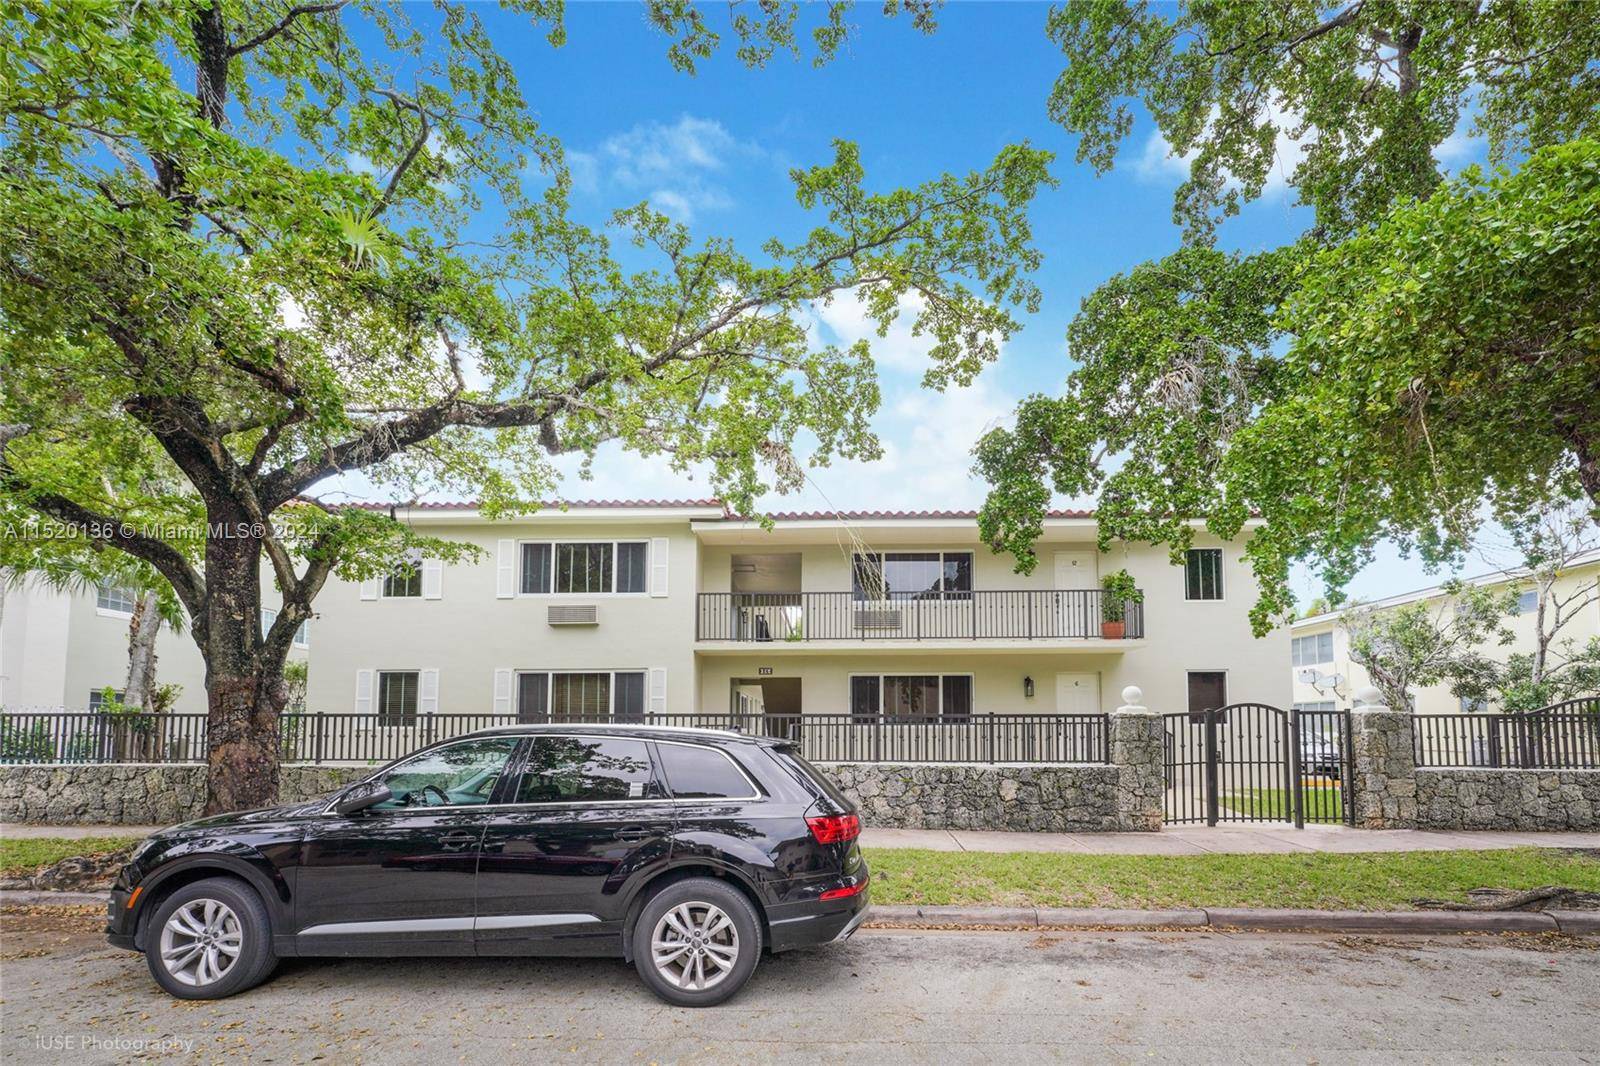 Beautiful apartment building for sale in Coral Gables.